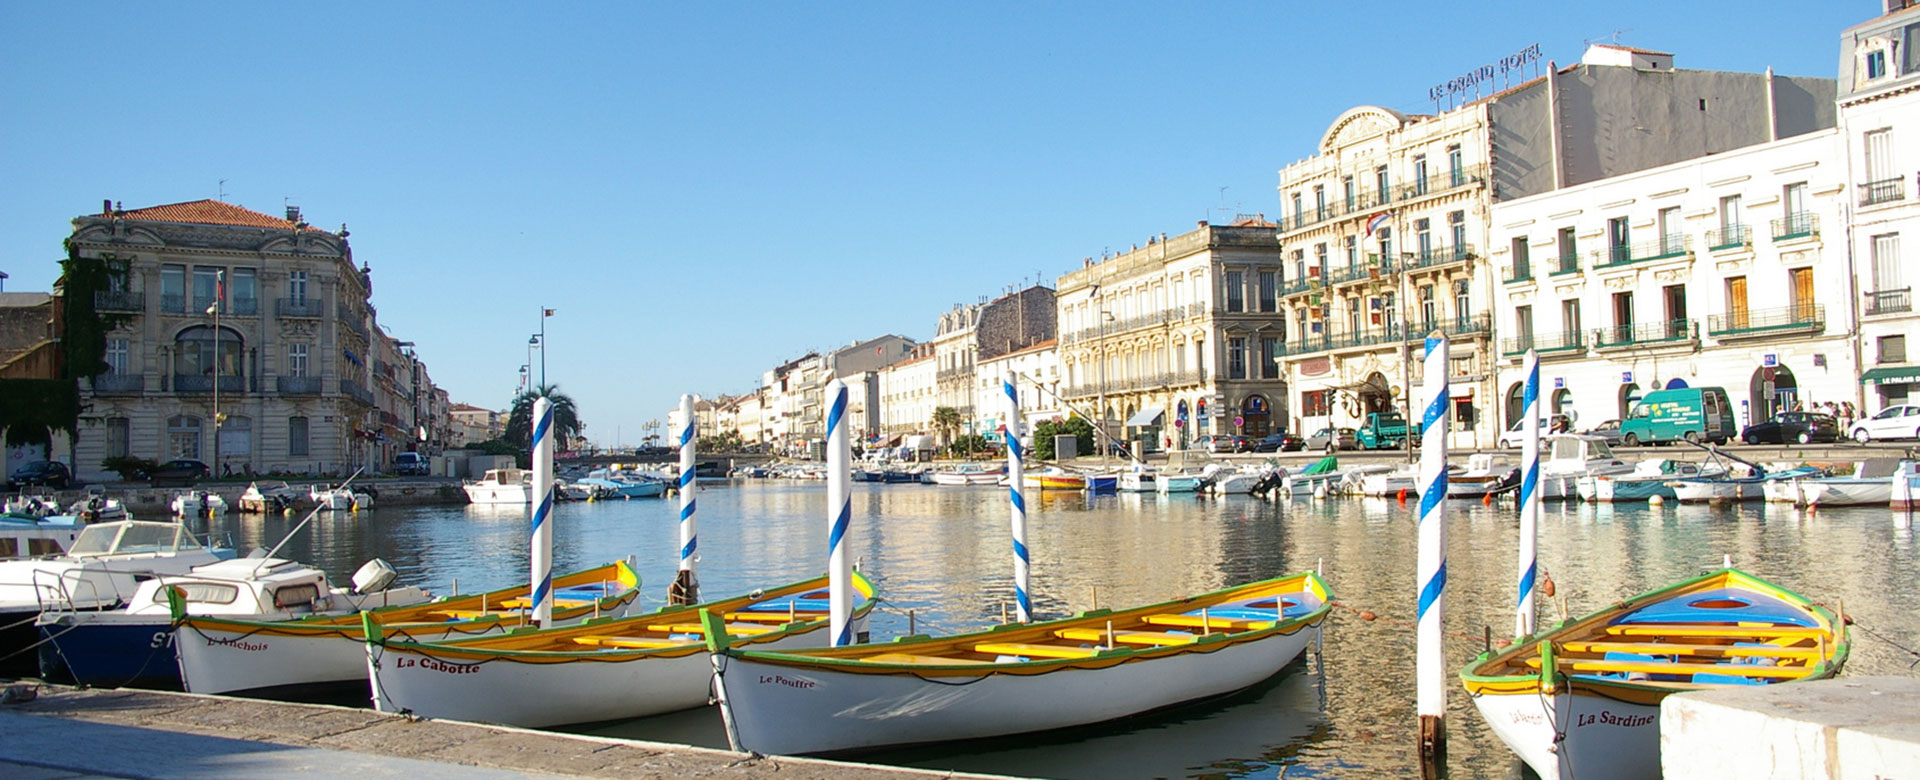 The Sète canals, not to be missed during your stay at La Gabinelle campsite near Béziers